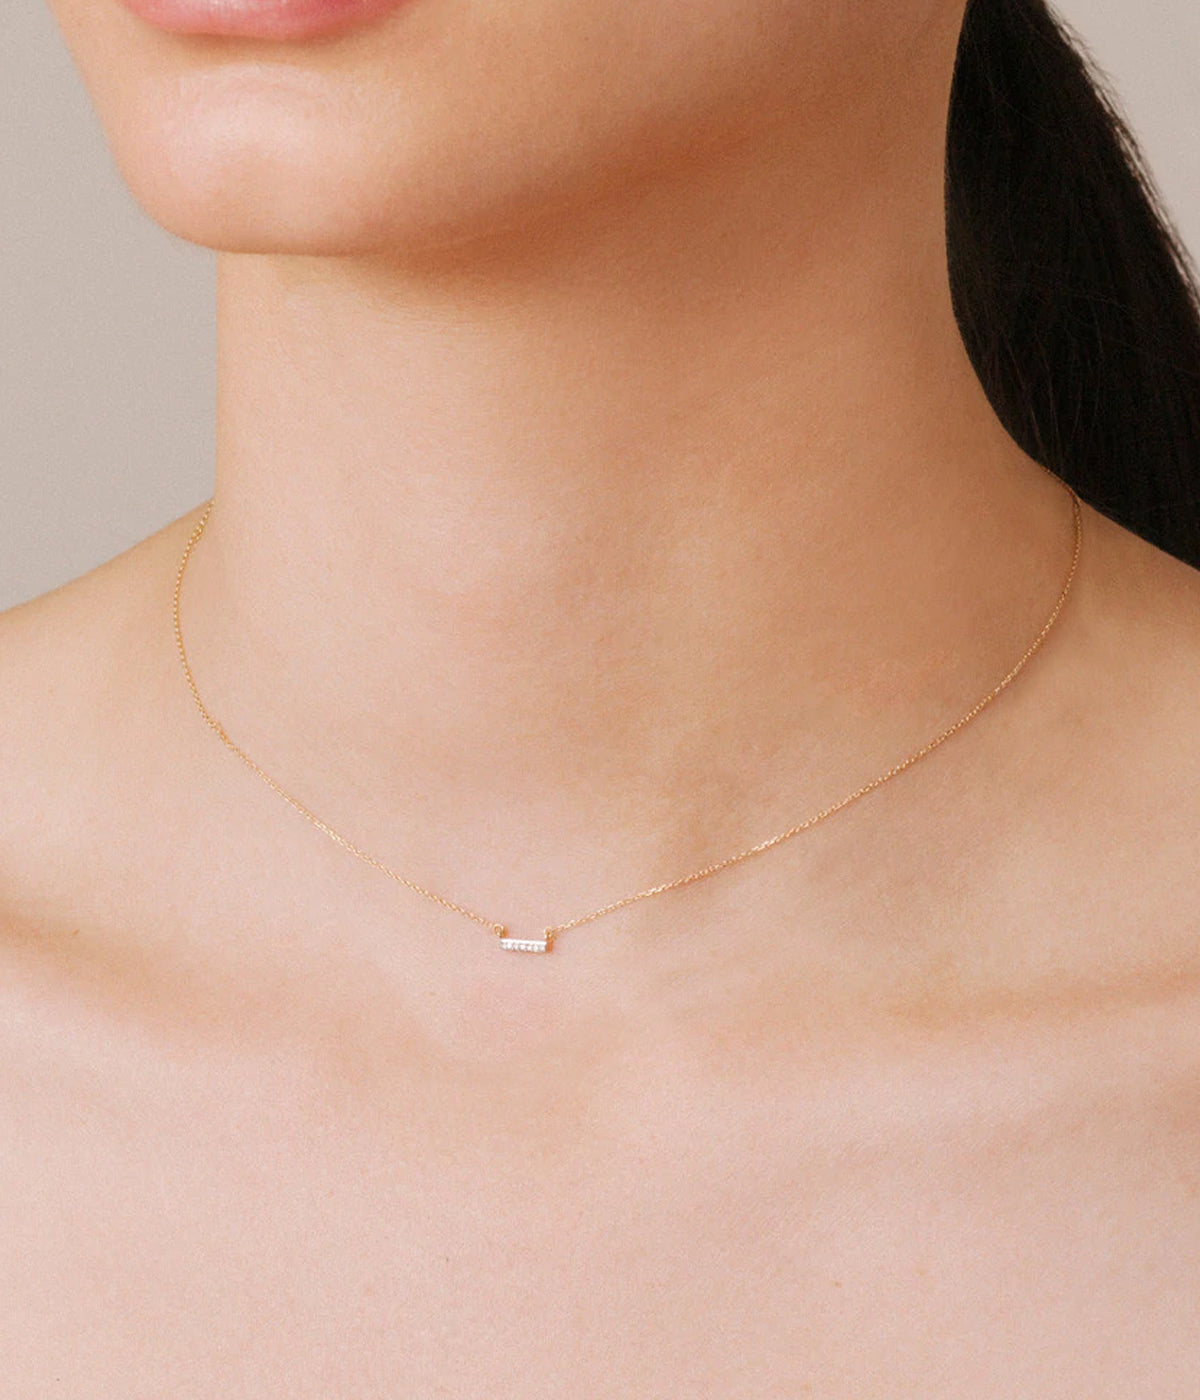 Super Tiny Pave Bar Necklace in Yellow Gold